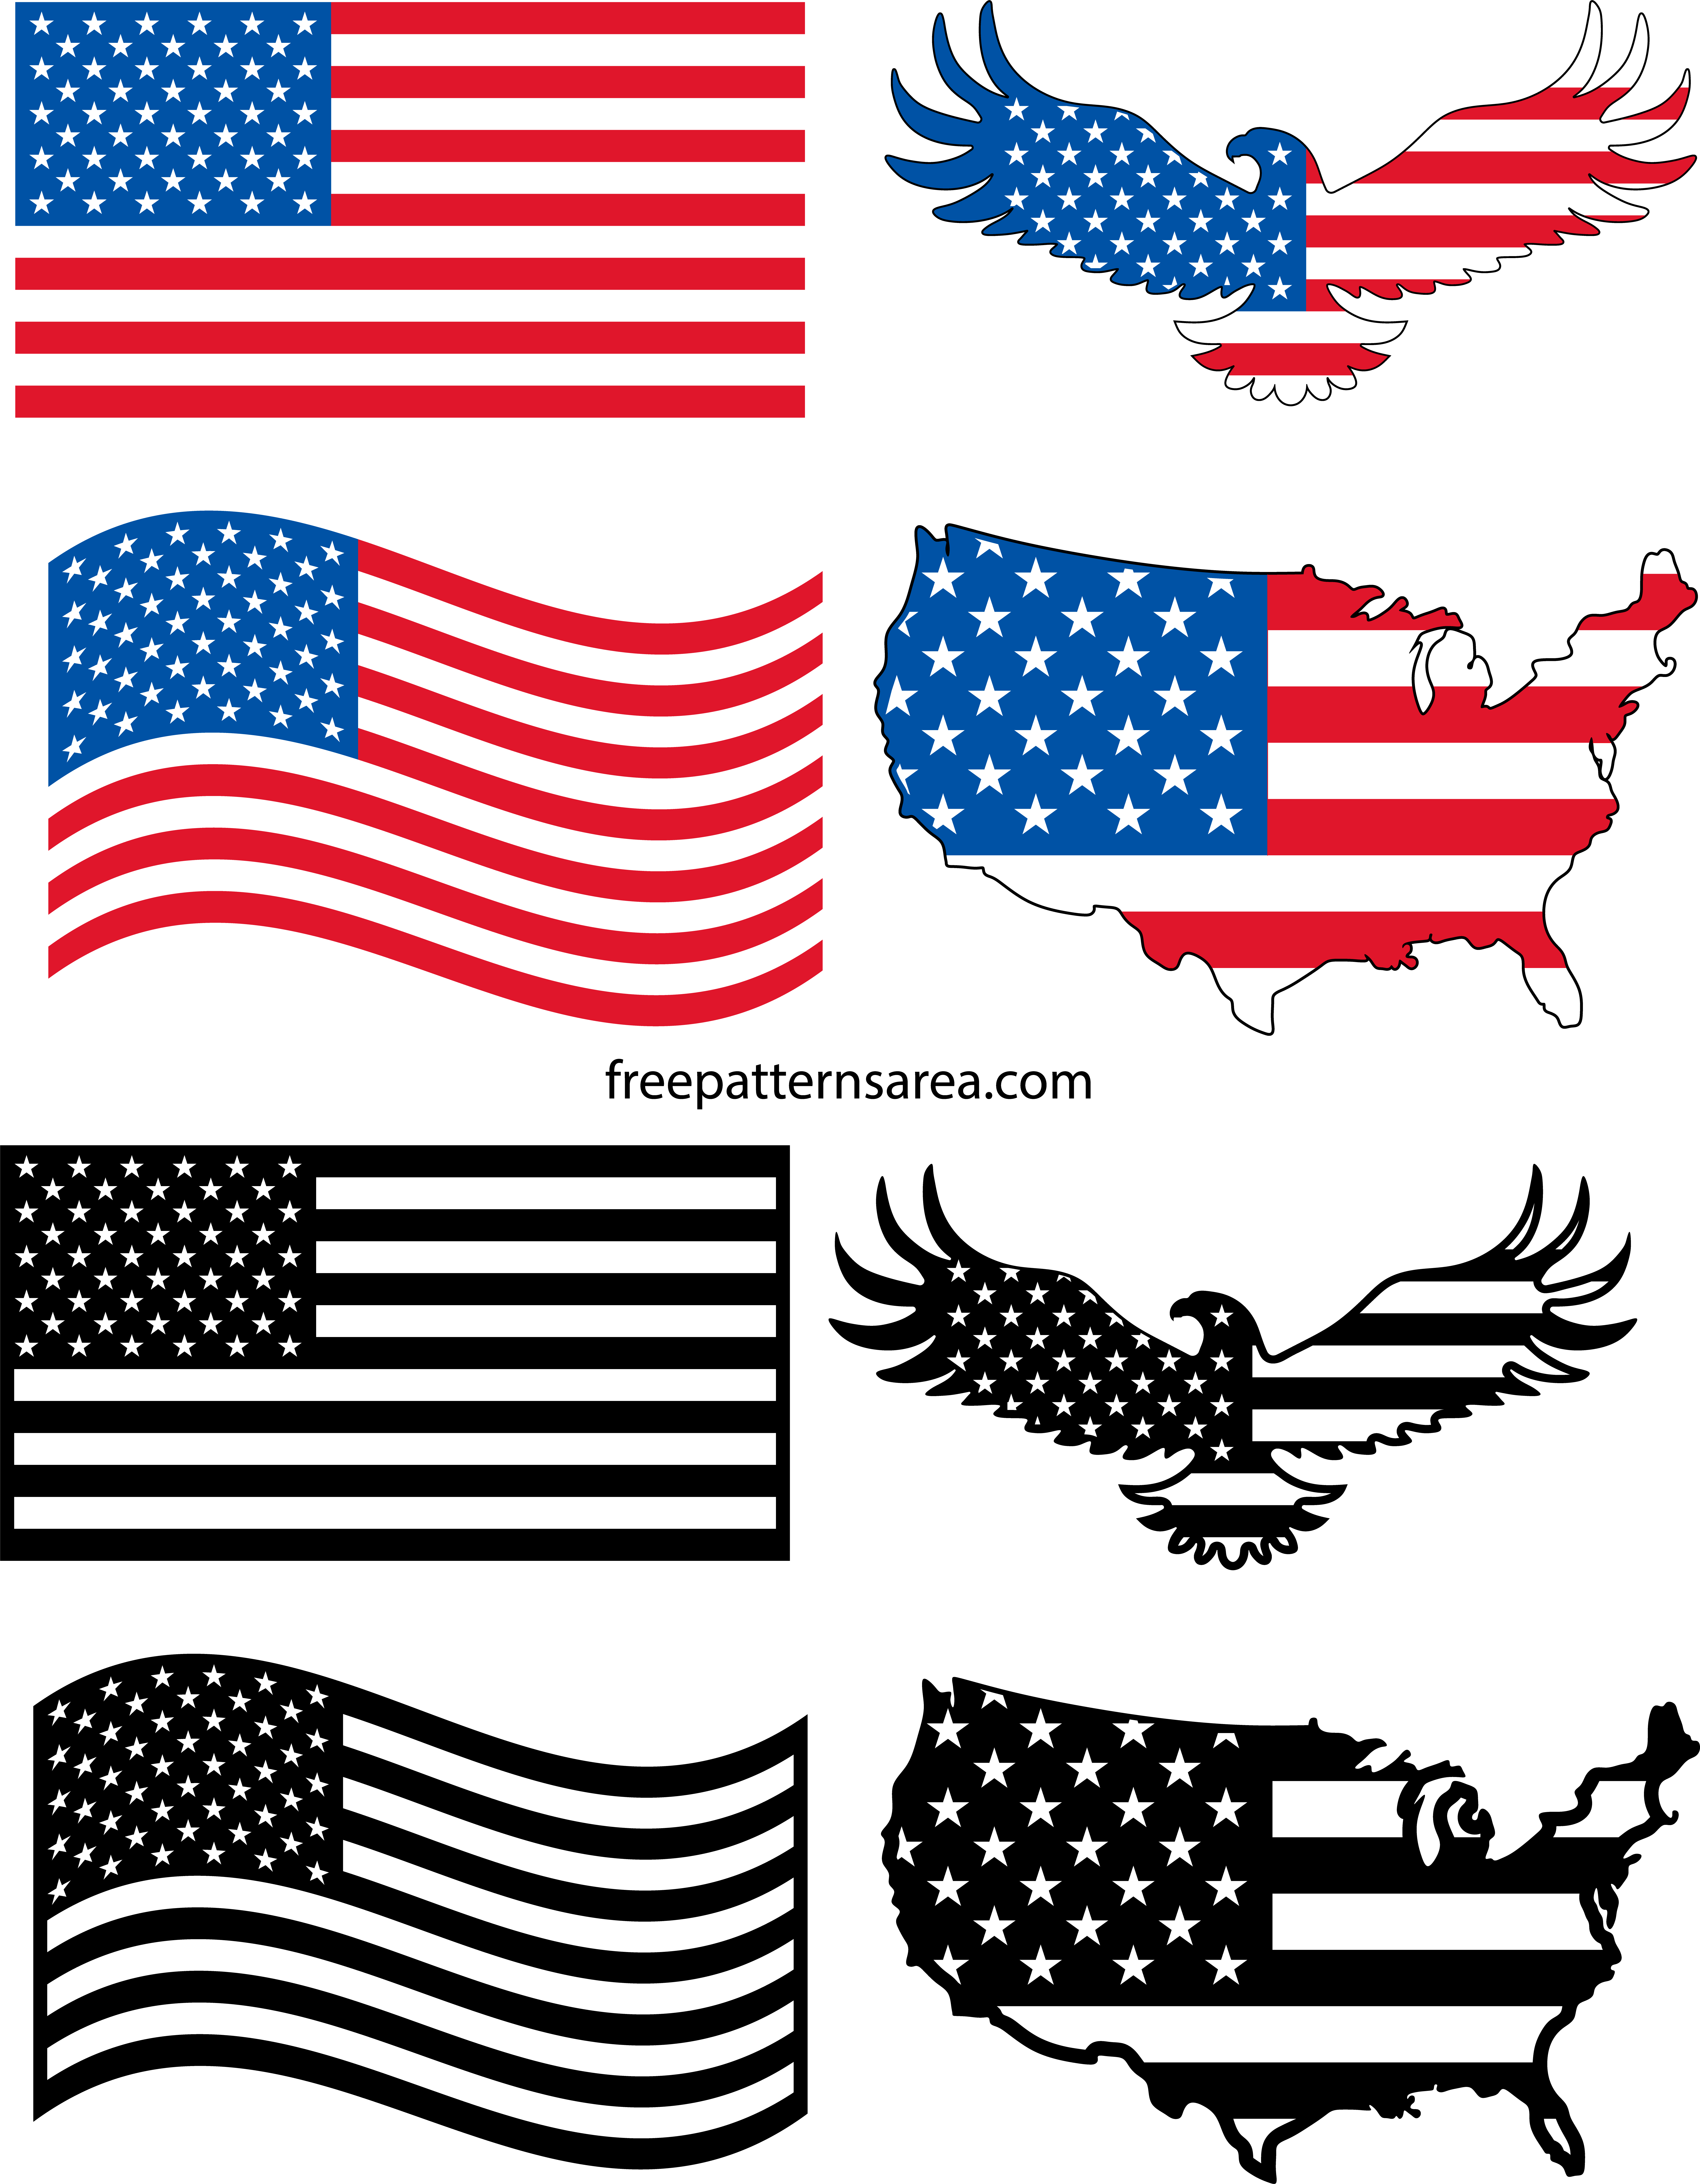 Download Usa, United States, American Flag Vector Images ...